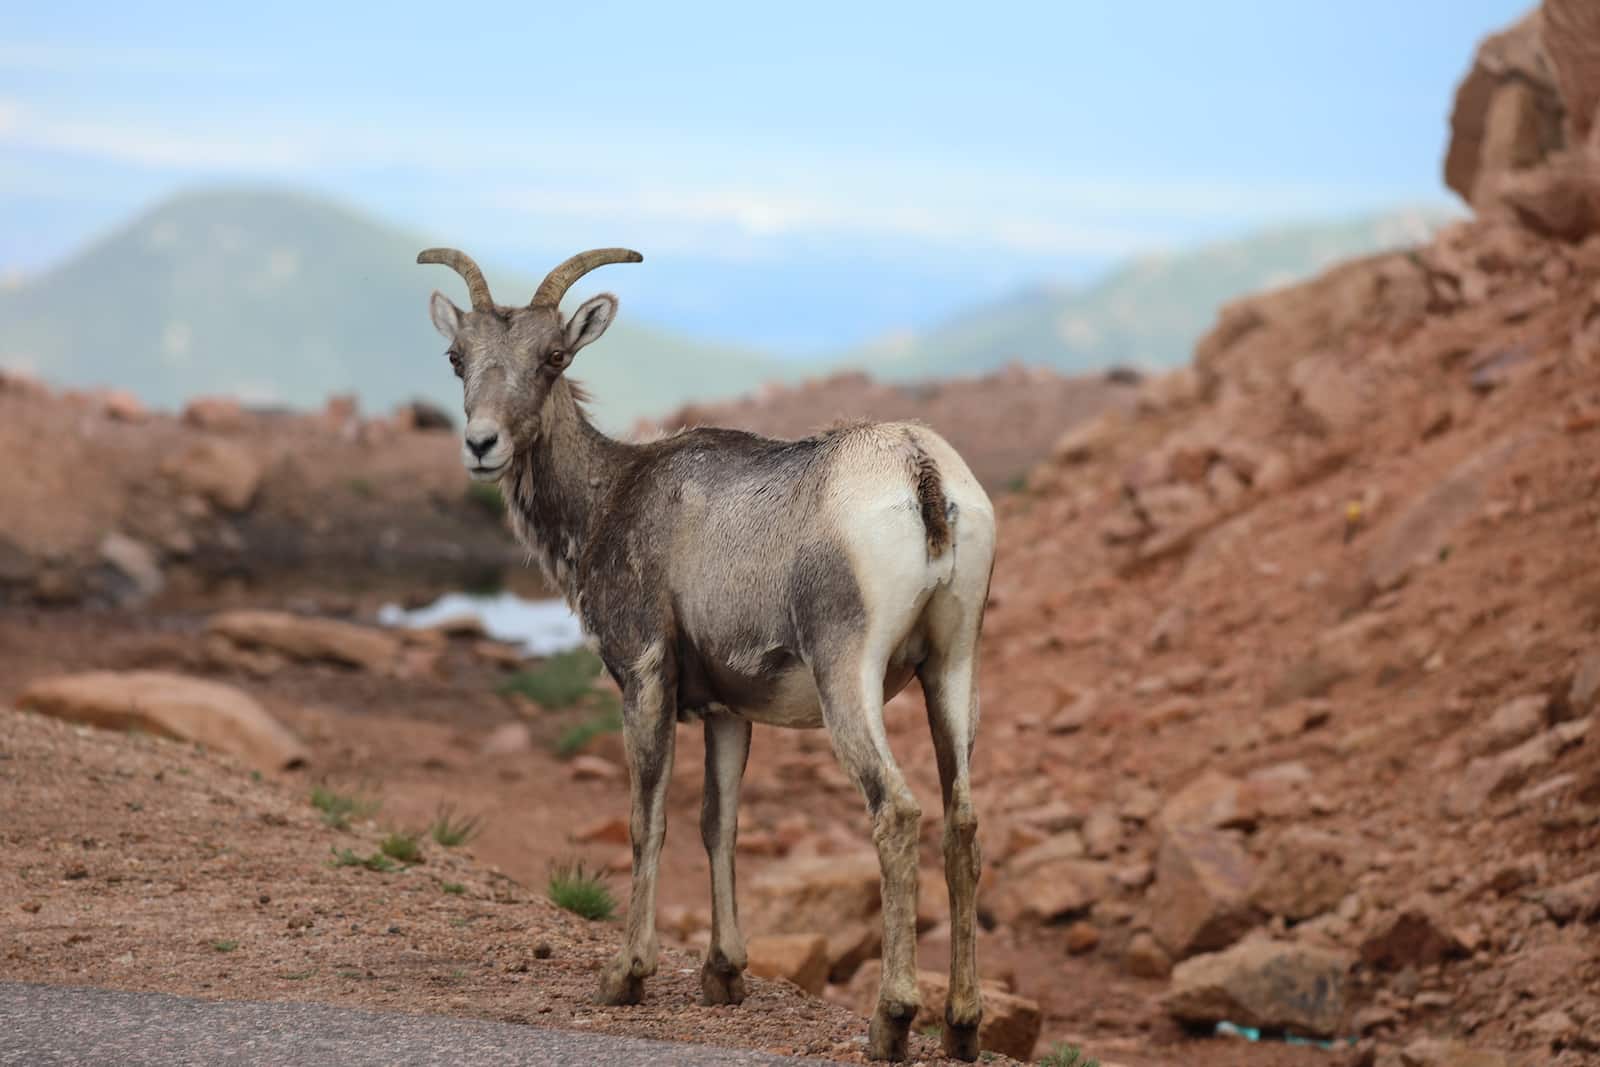 A big-horned sheep checks cameraman out on the way back down from Pike's Peak in Colorado